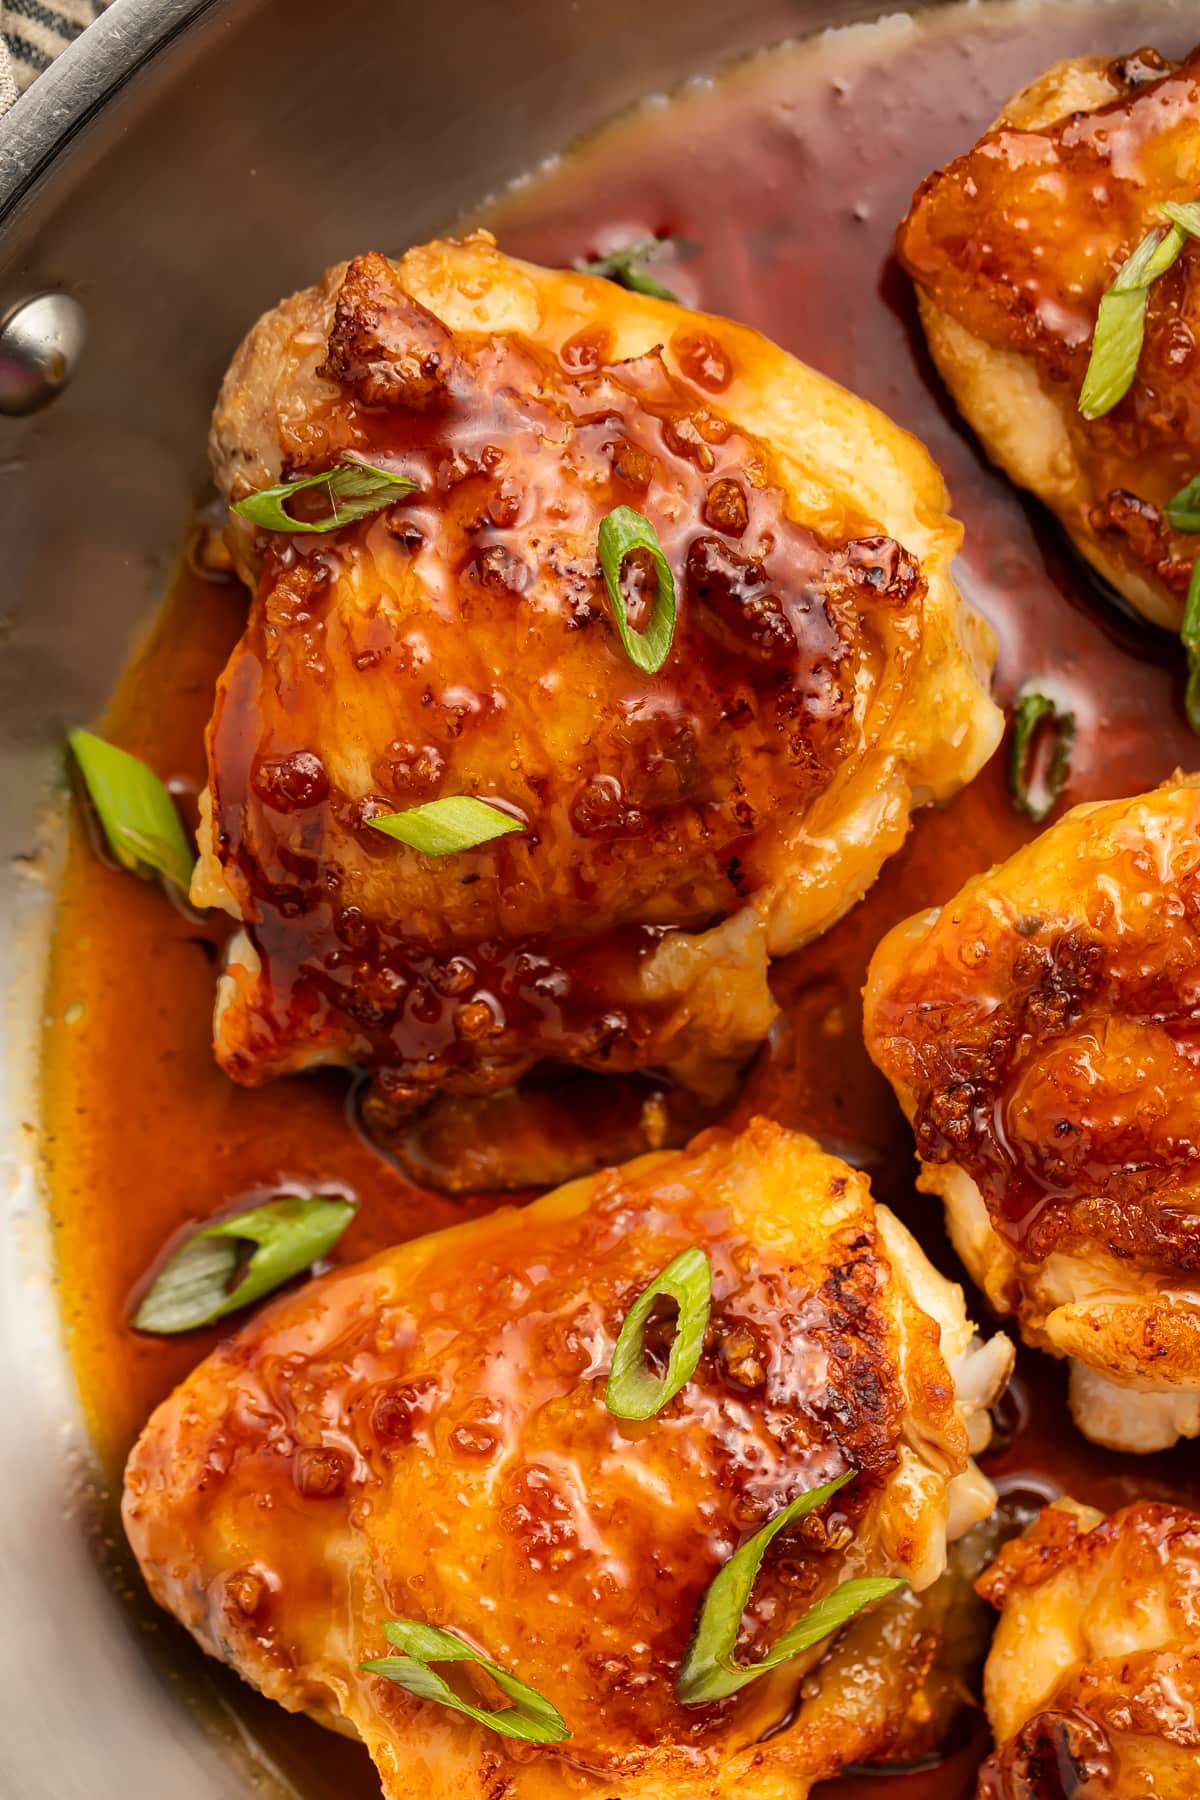 Honey garlic chicken thighs, seared and then roasted until crisp, resting in a silver skillet with additional sauce.